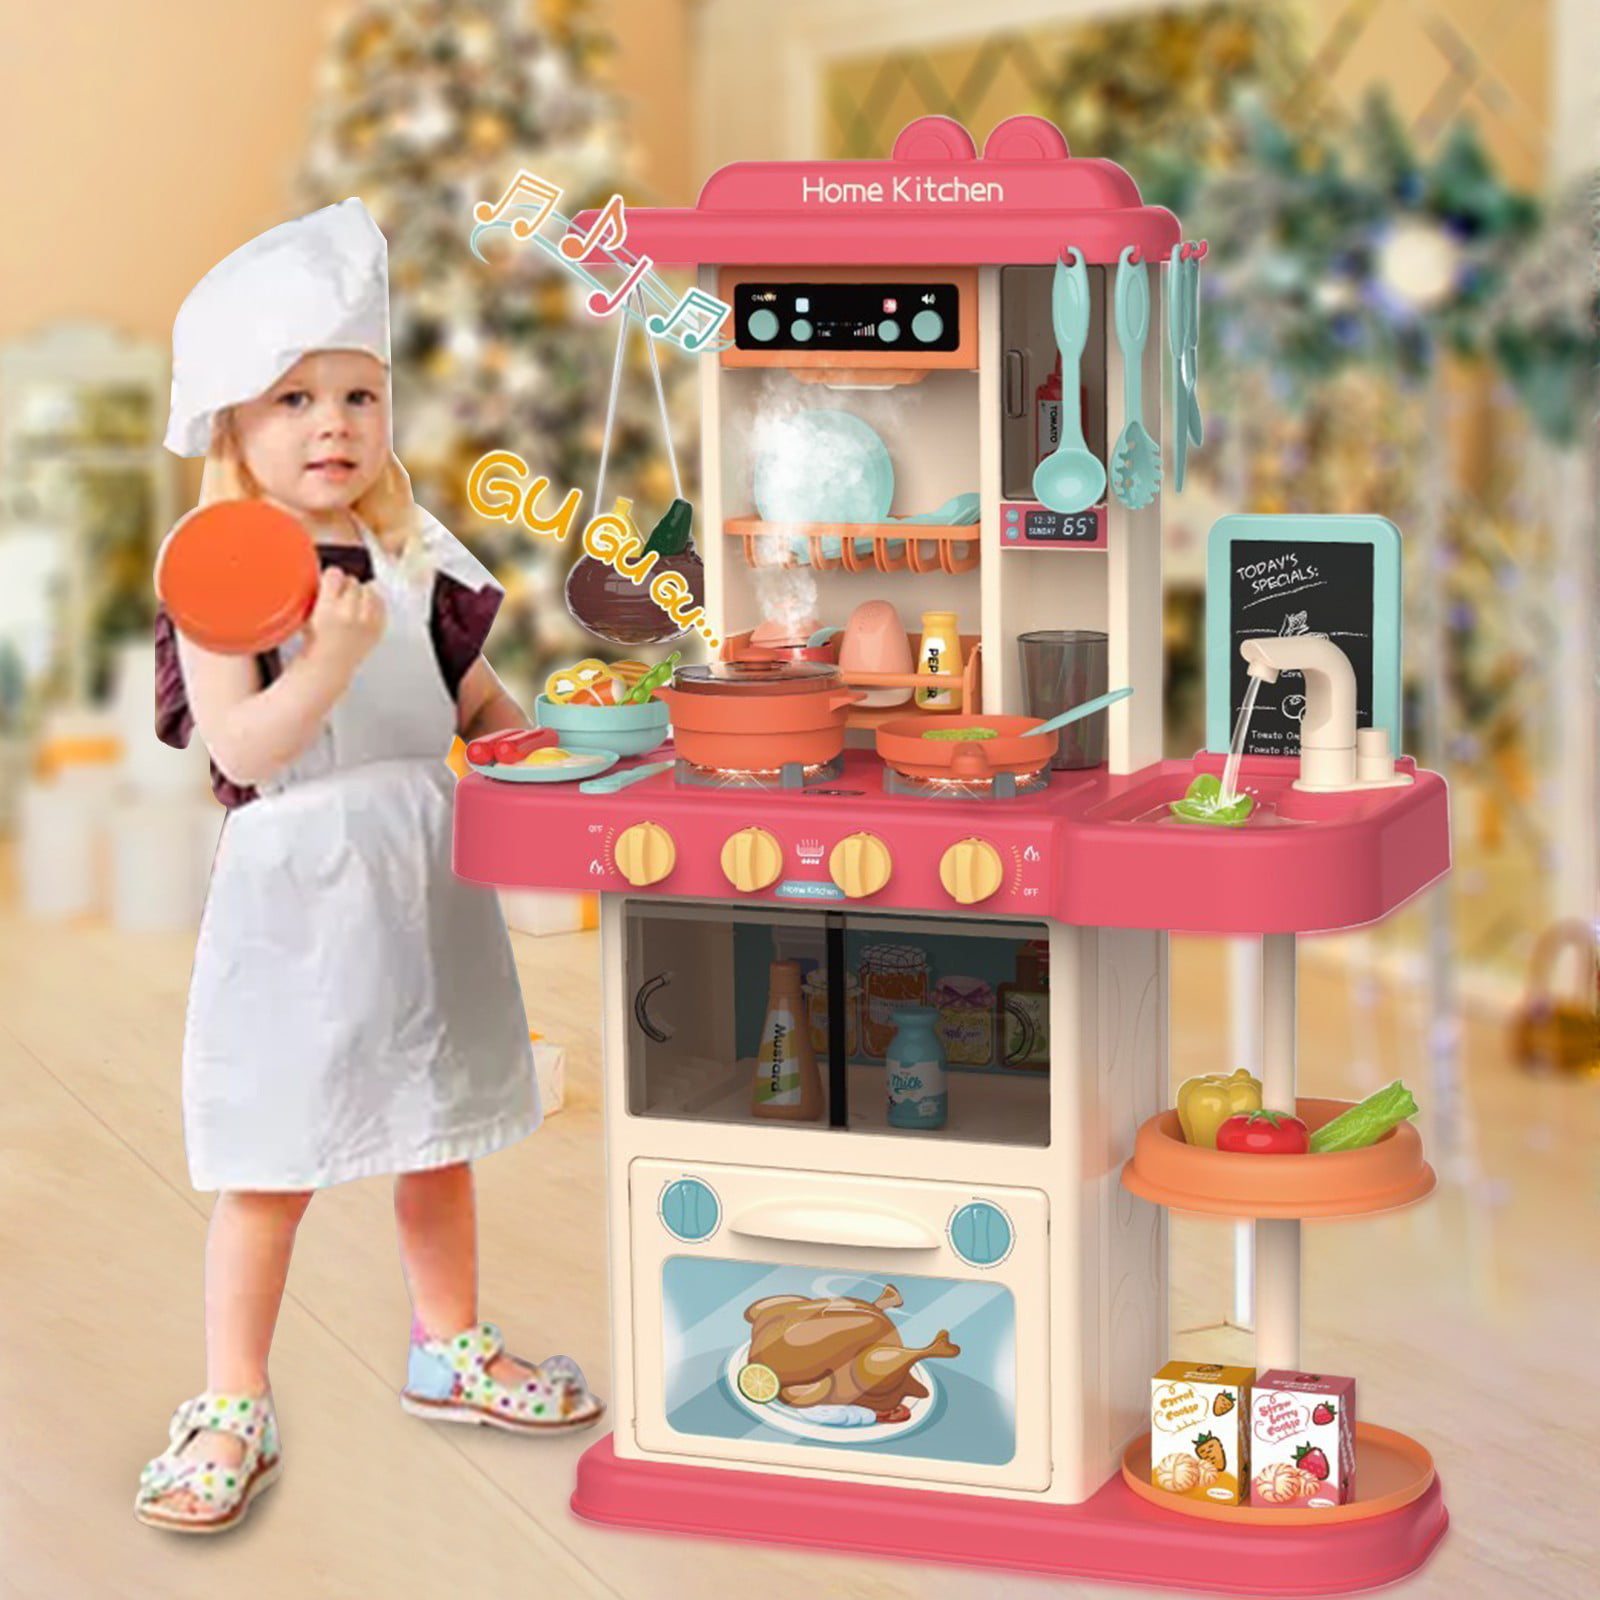 Role Play Kids Kitchen Playset With Real Cooking And Water Boiling Sounds-Gril 